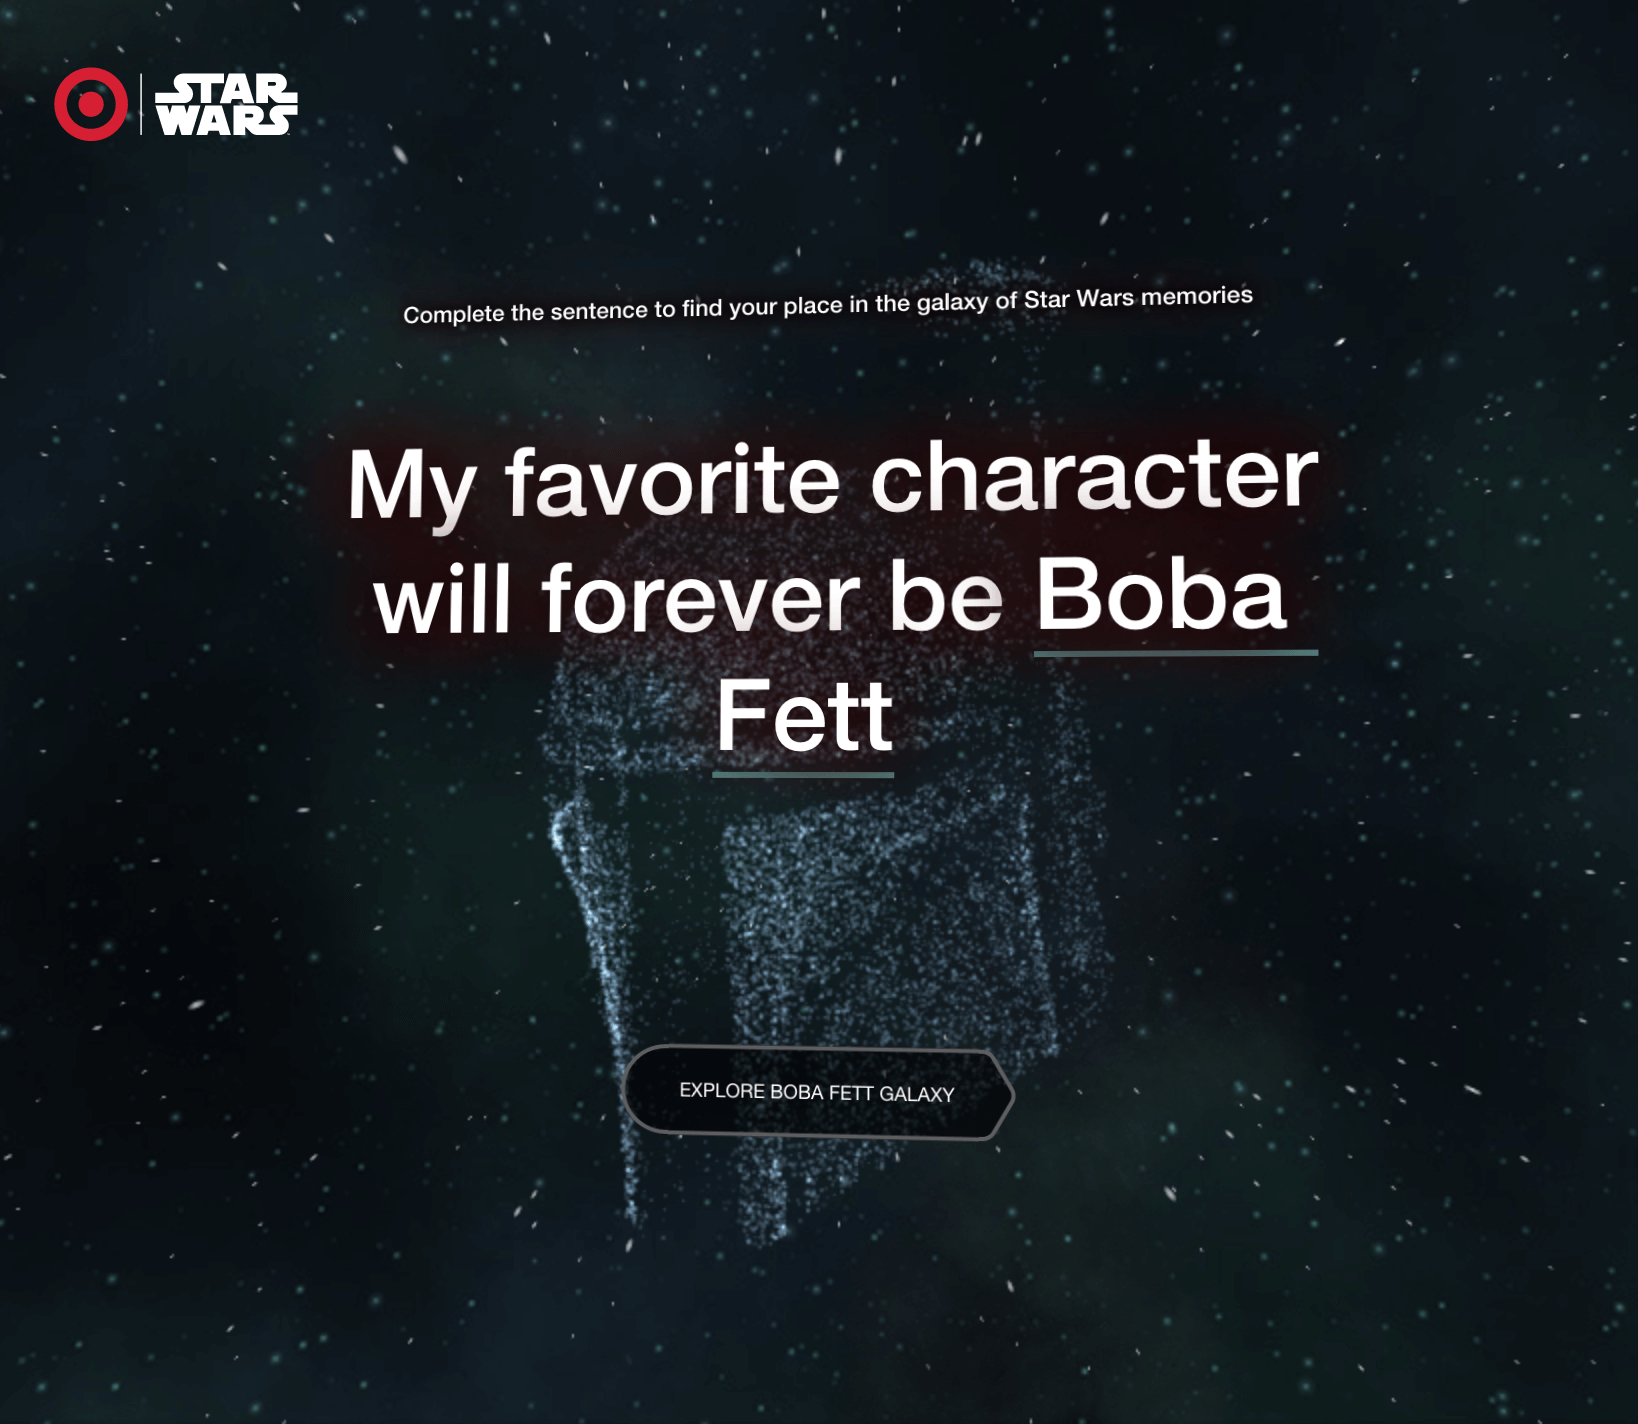 Boba Fett Galaxy in Share the Force Target Experience